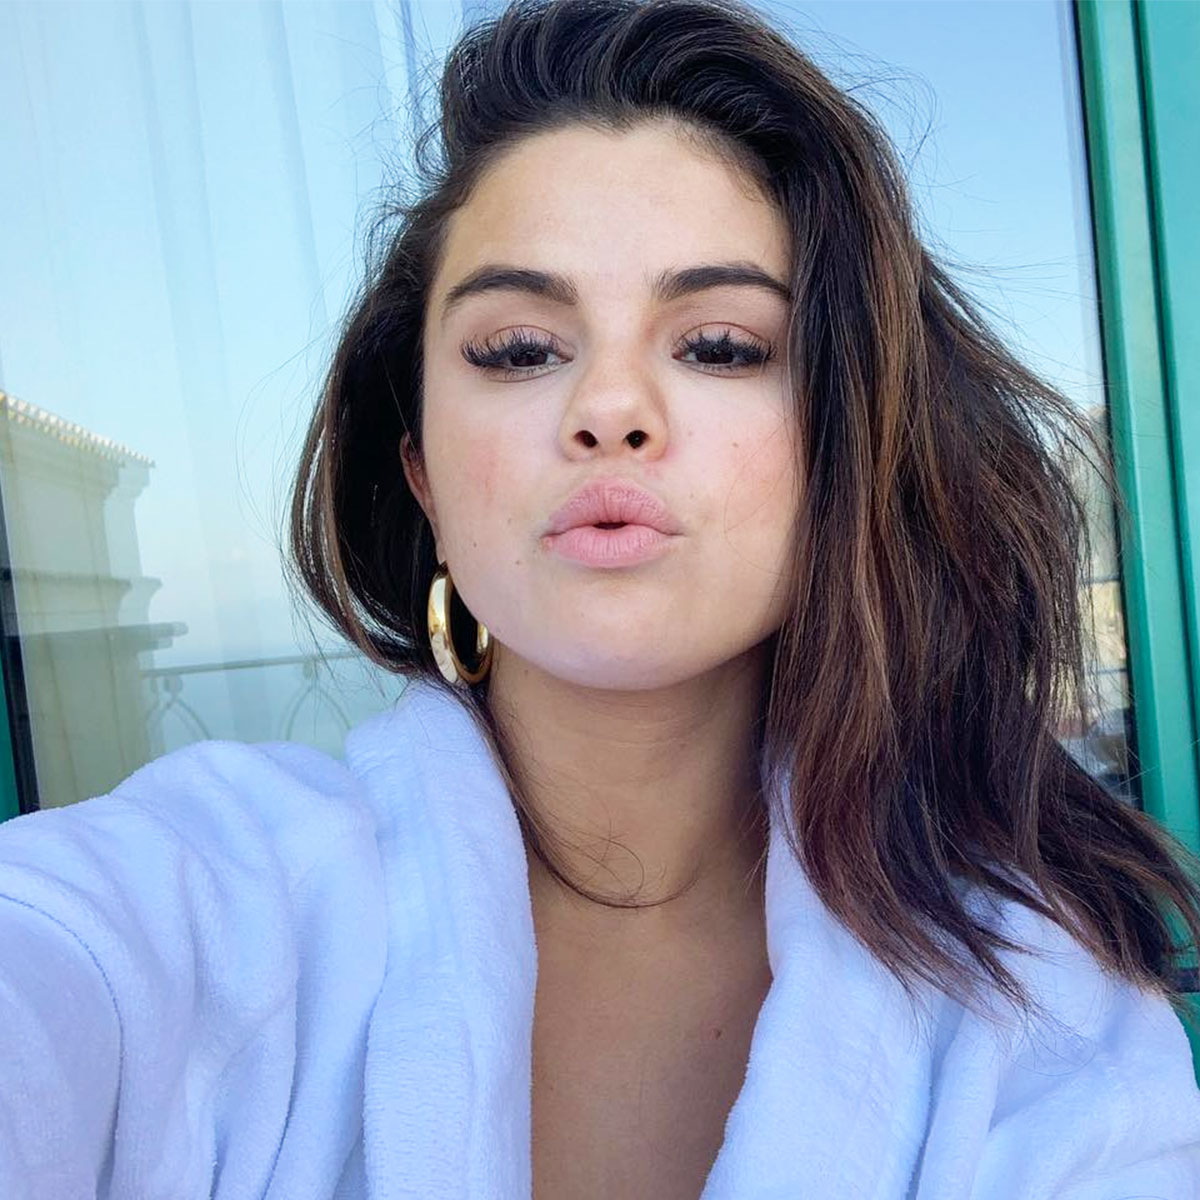 Selena Gomez heads home from workout with flushed face